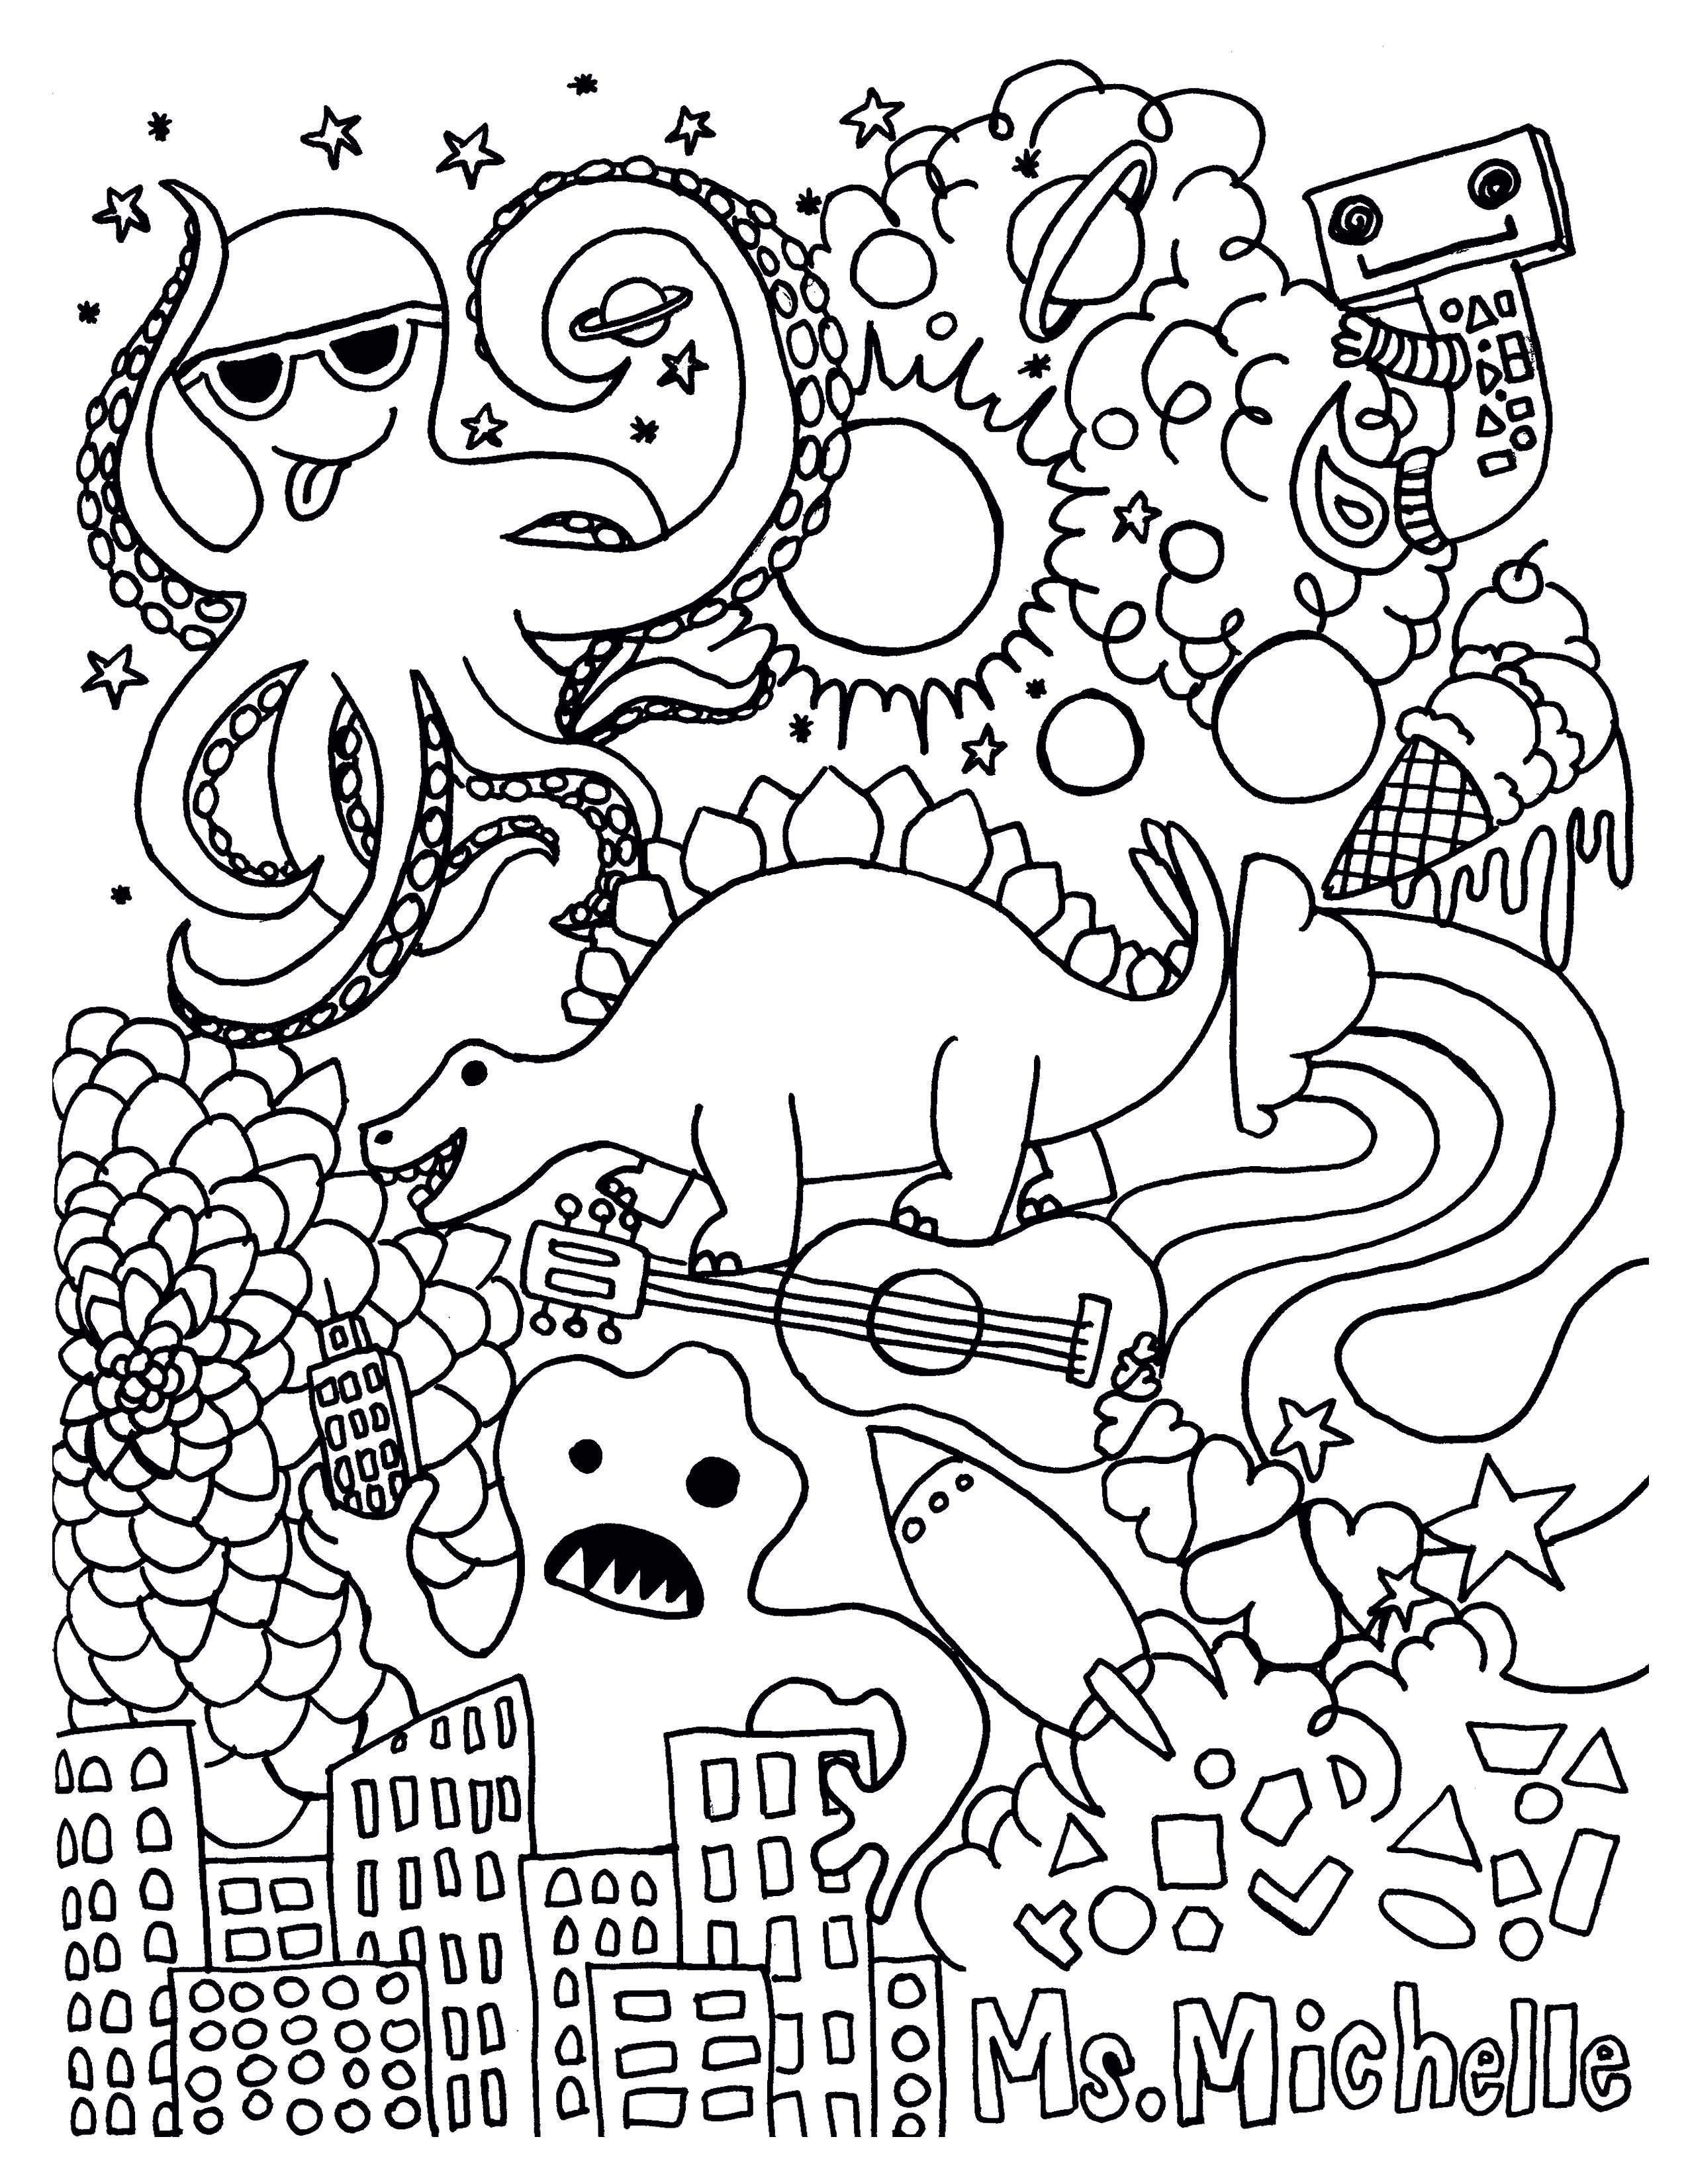 Free Printable Coloring Pages With Quotes Unique Free Coloring Pages With Quotes Jvzooreview